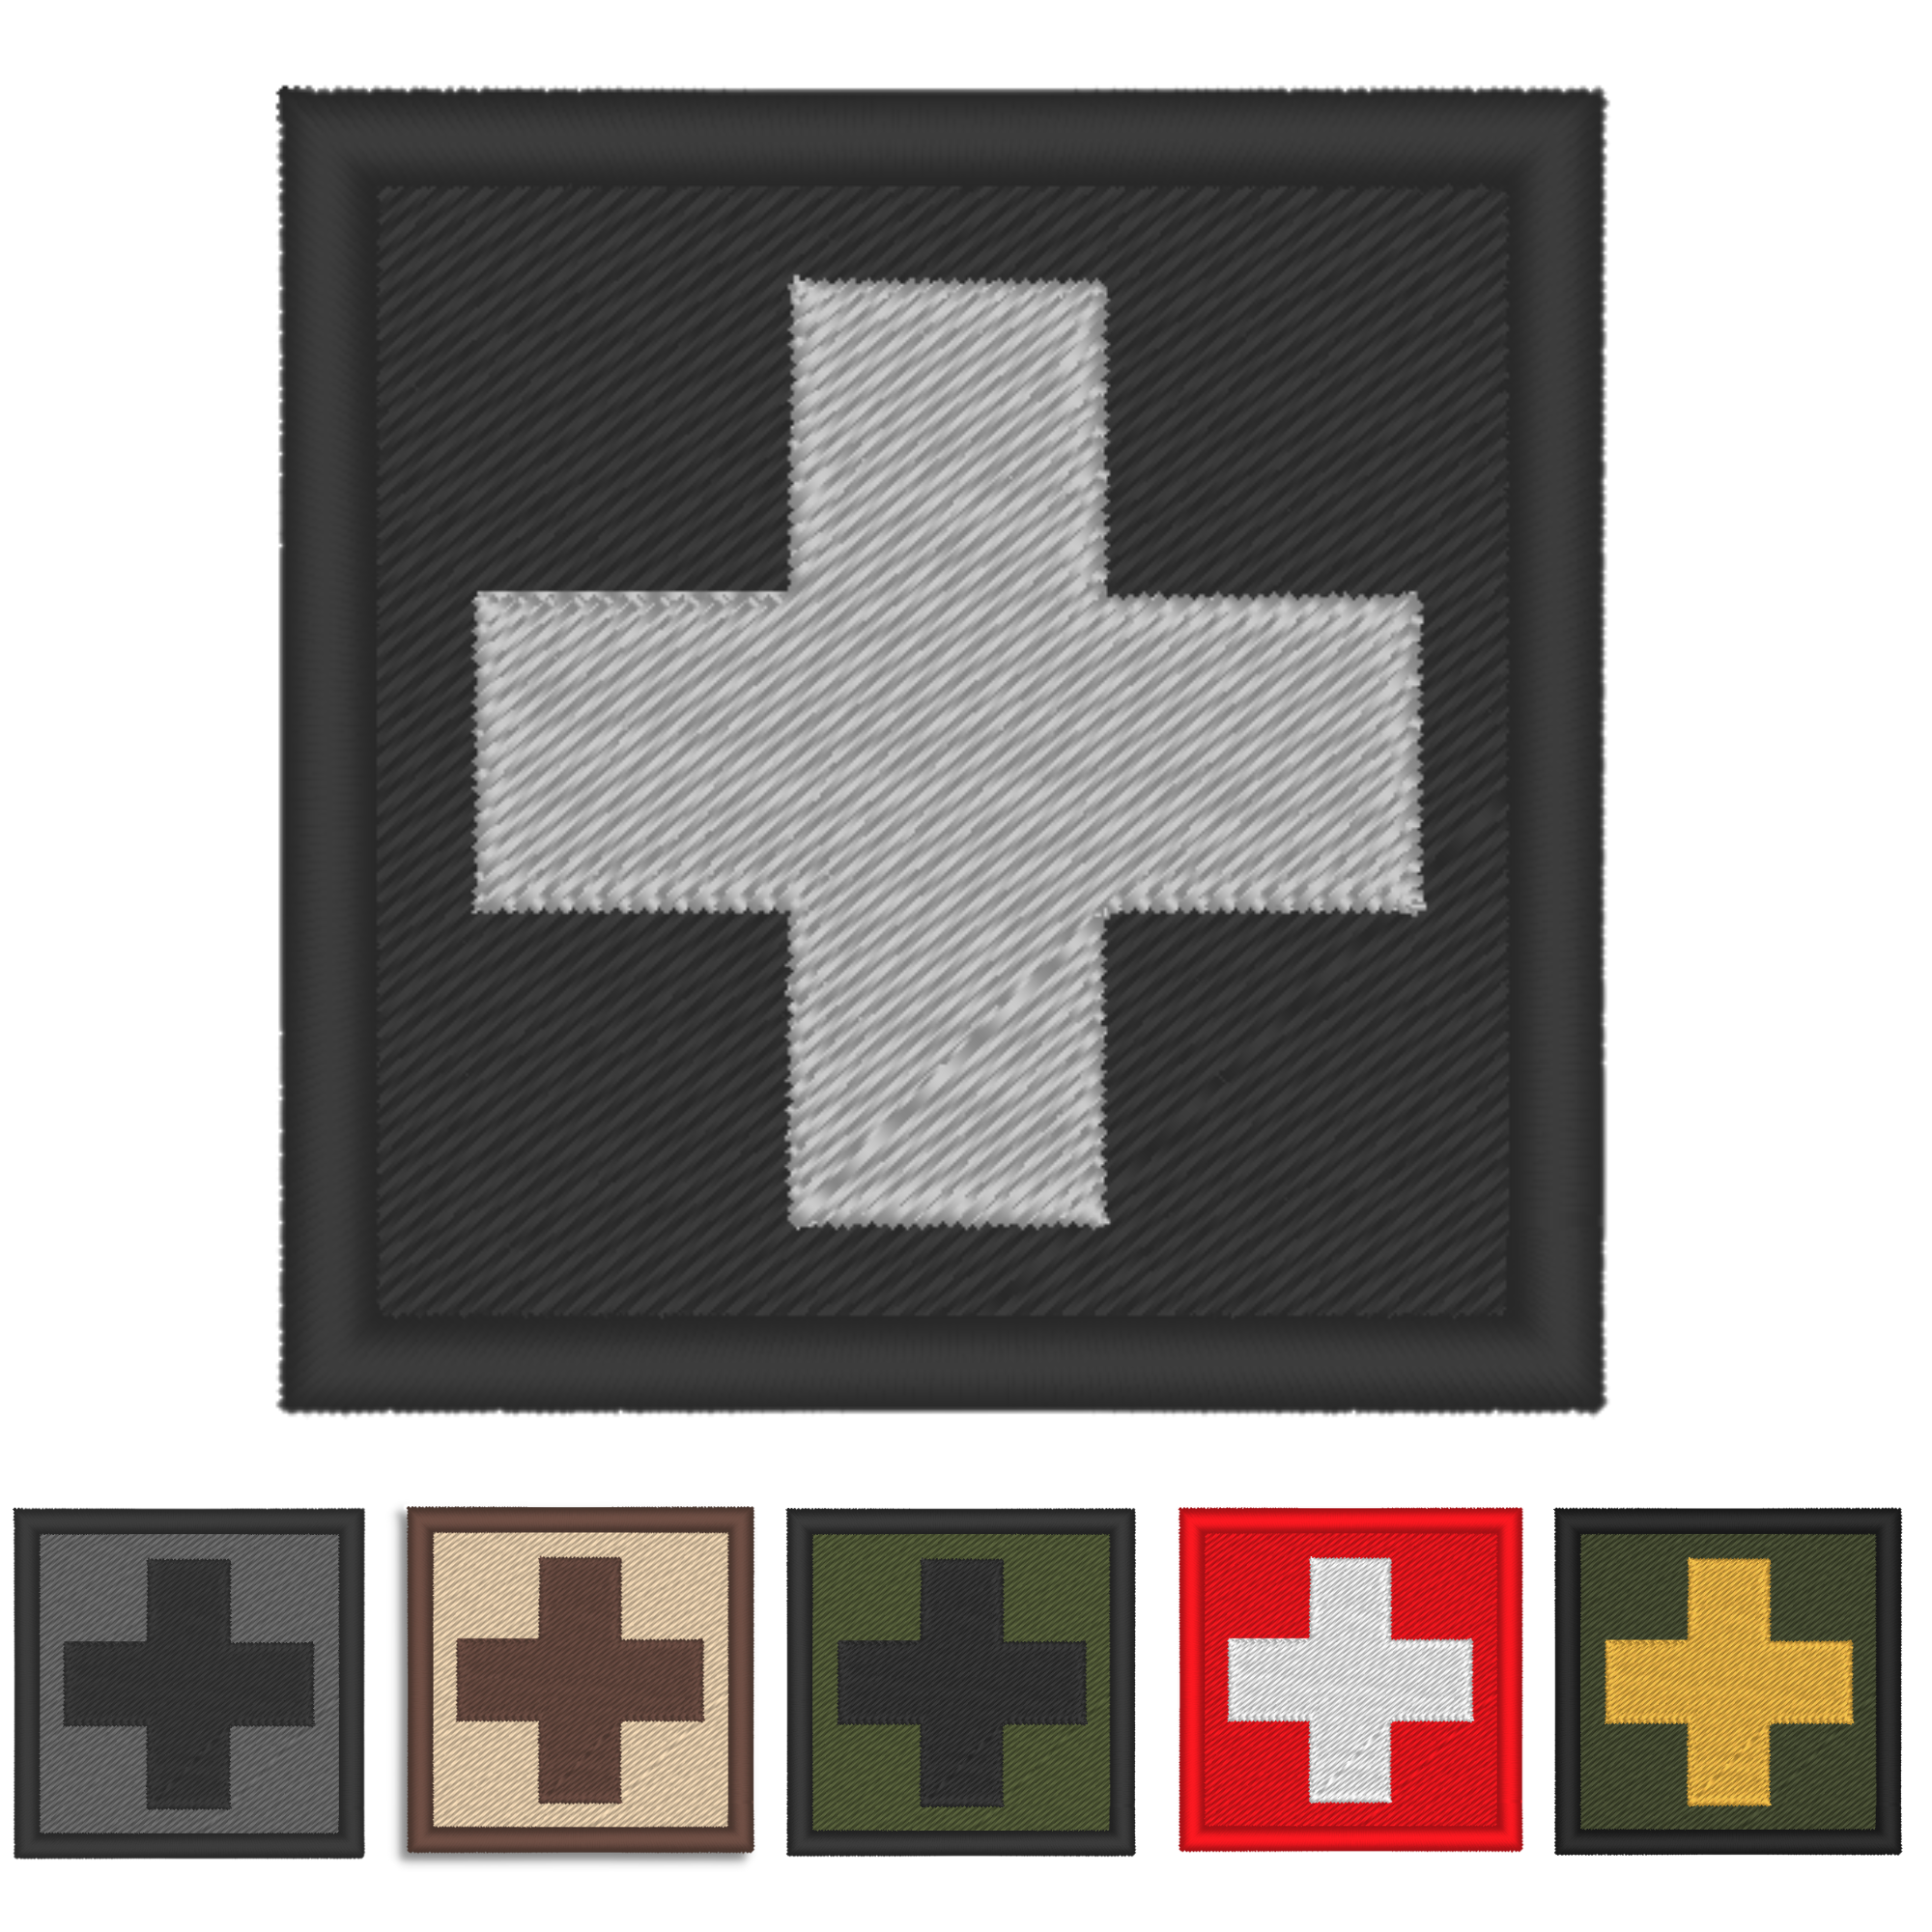 Medic Rubber Patch, grau/schwarz, Function Patches